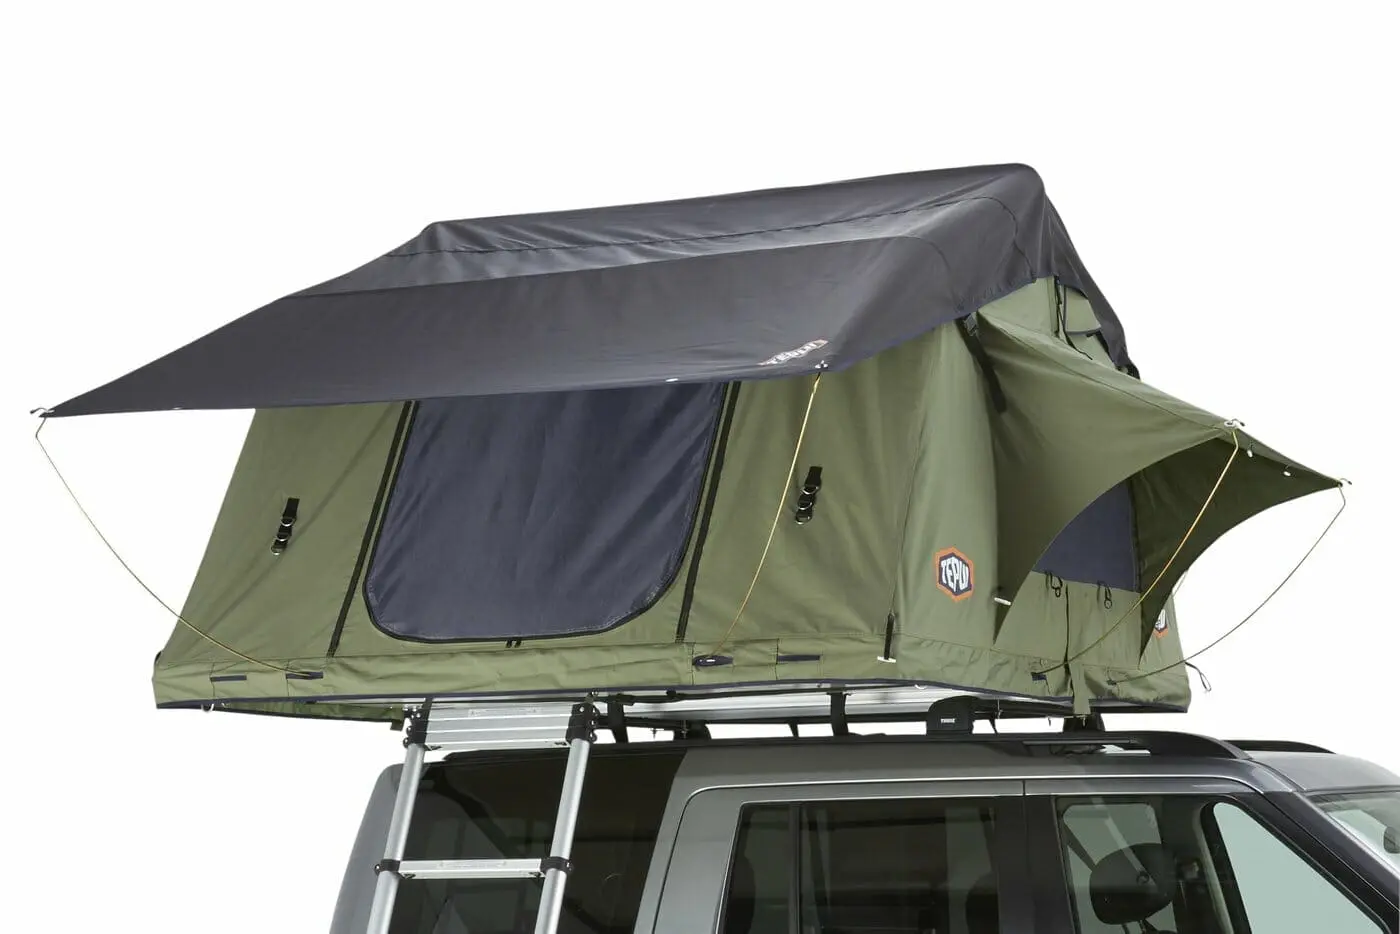 Softshell rooftop tent mounted on vehicle